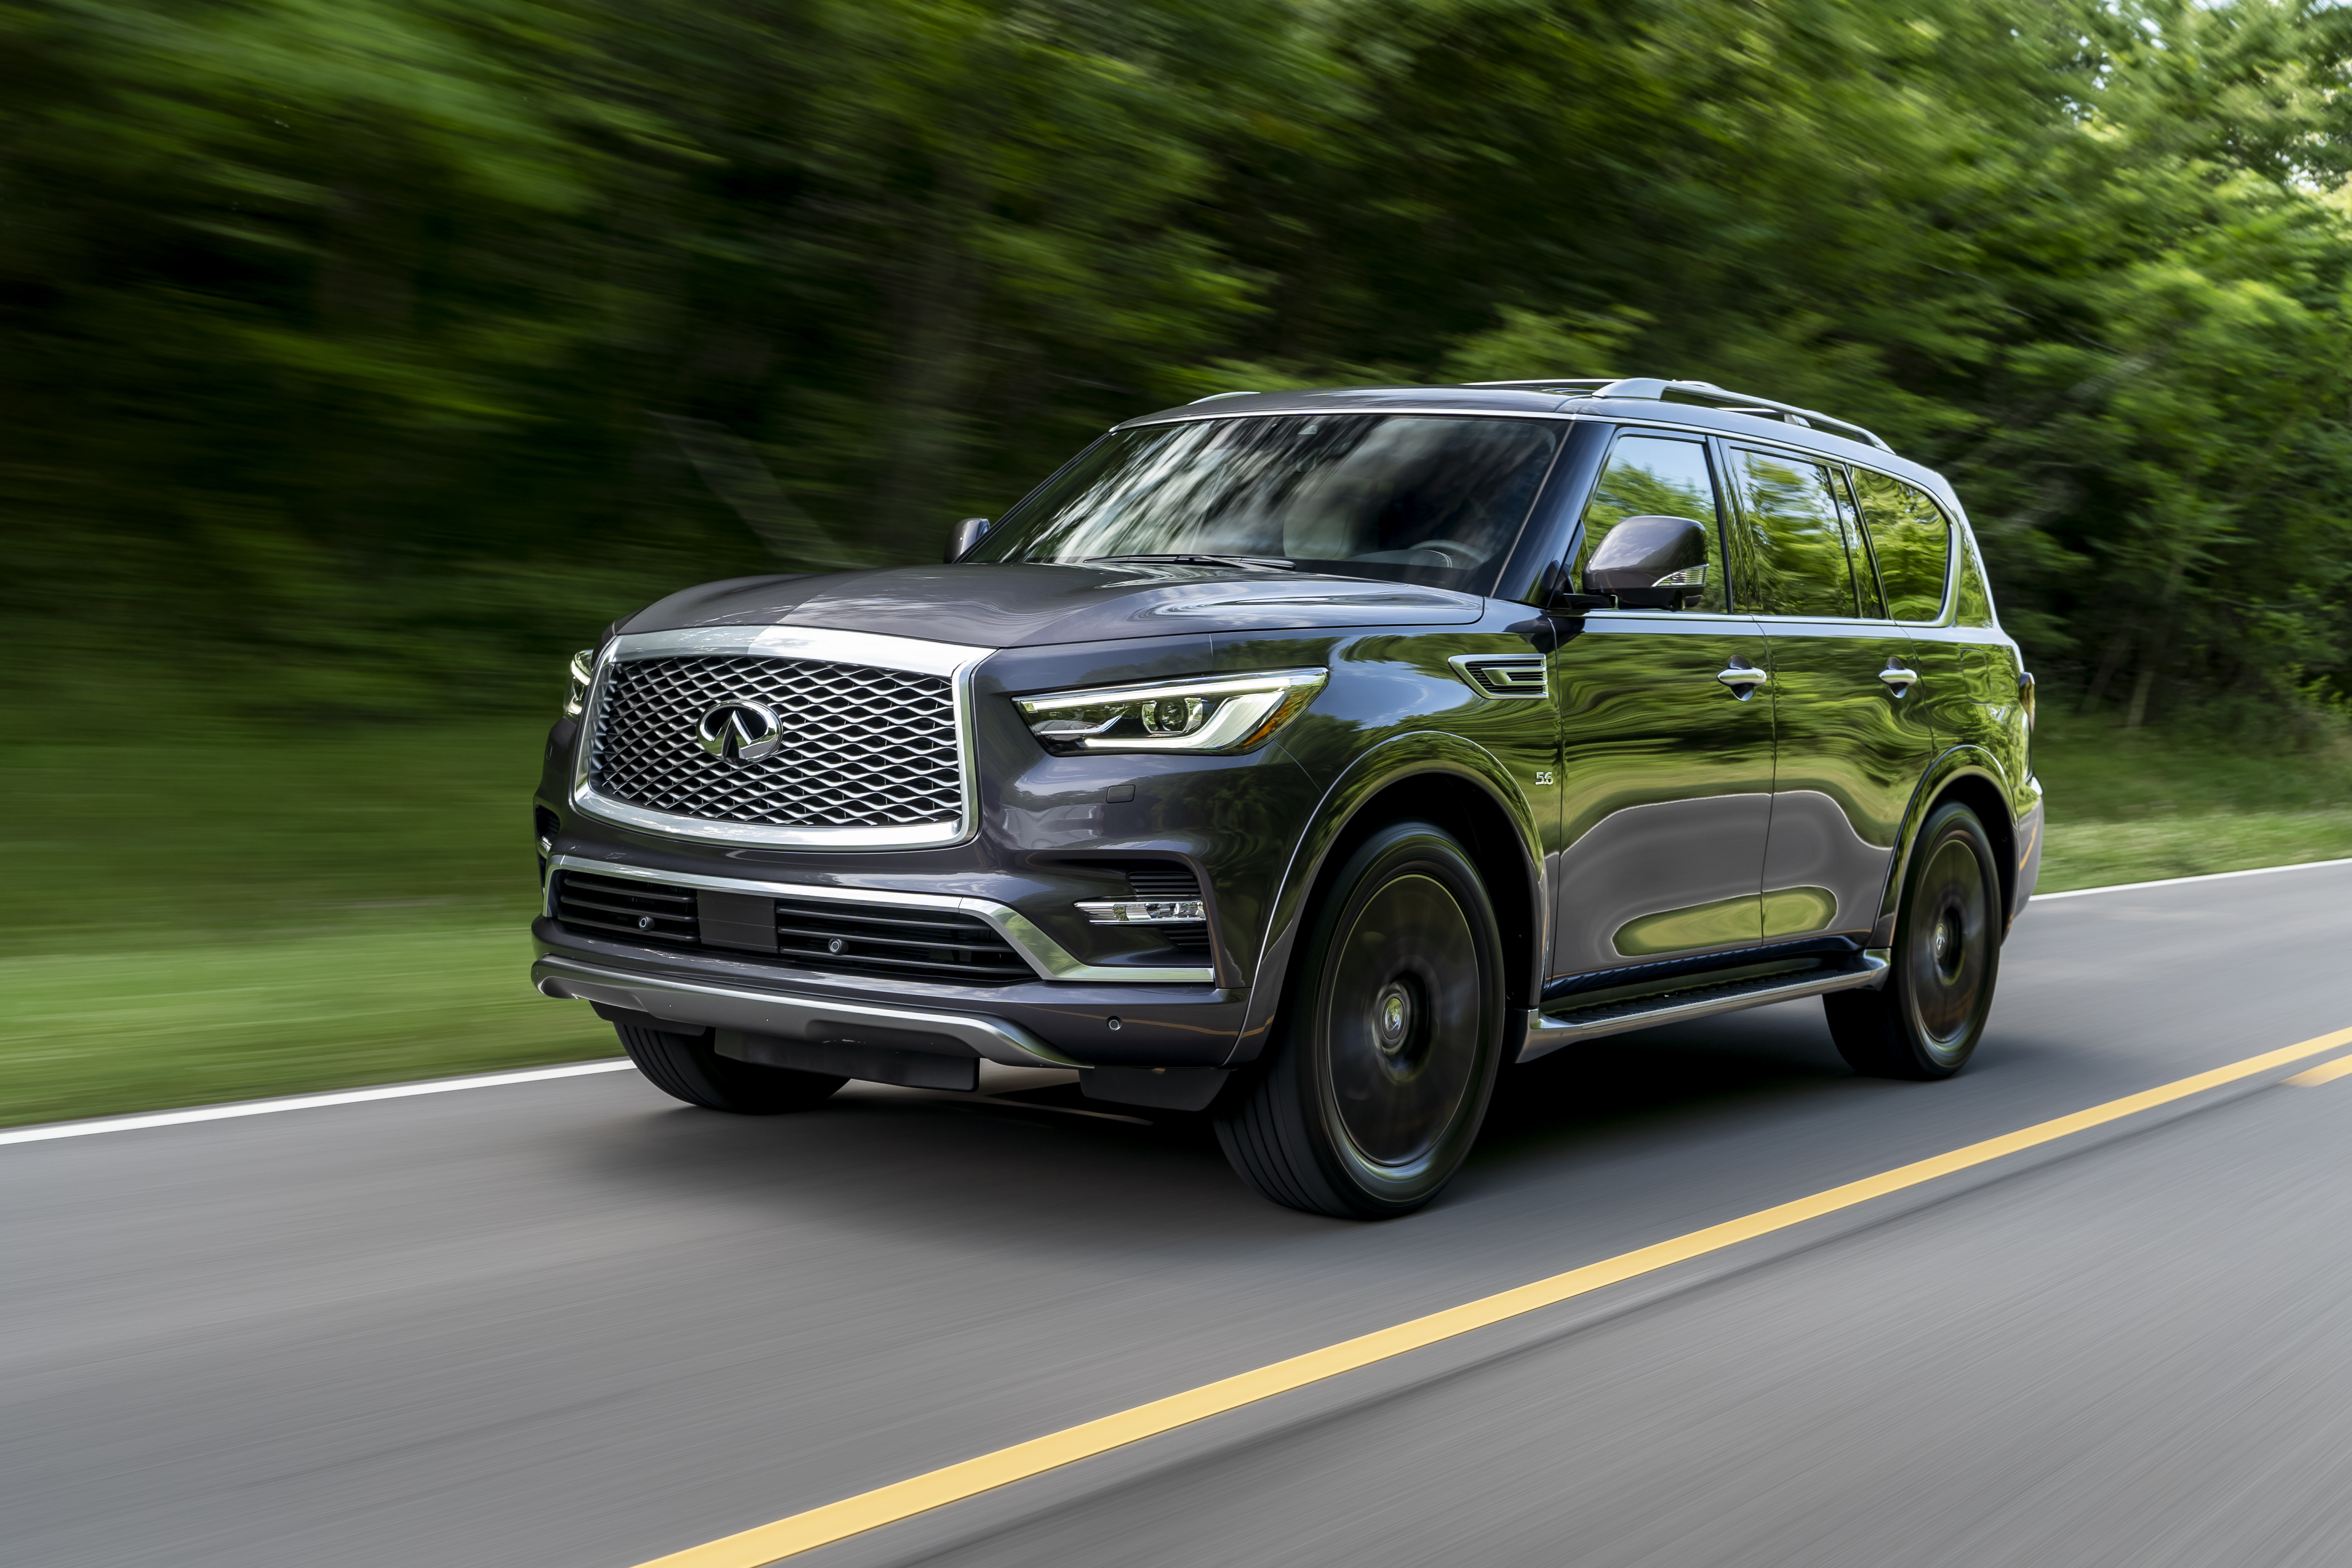 The 2019 QX80 LIMITED exterior features include specially designed dark machine-finished 22-inch forged aluminum-alloy wheels; satin chrome exterior trim, roof rails and crossbars; and unique front and rear bumper lower treatment. The QX80 is available in five exterior colors, including a new LIMITED-exclusive Anthracite Gray.